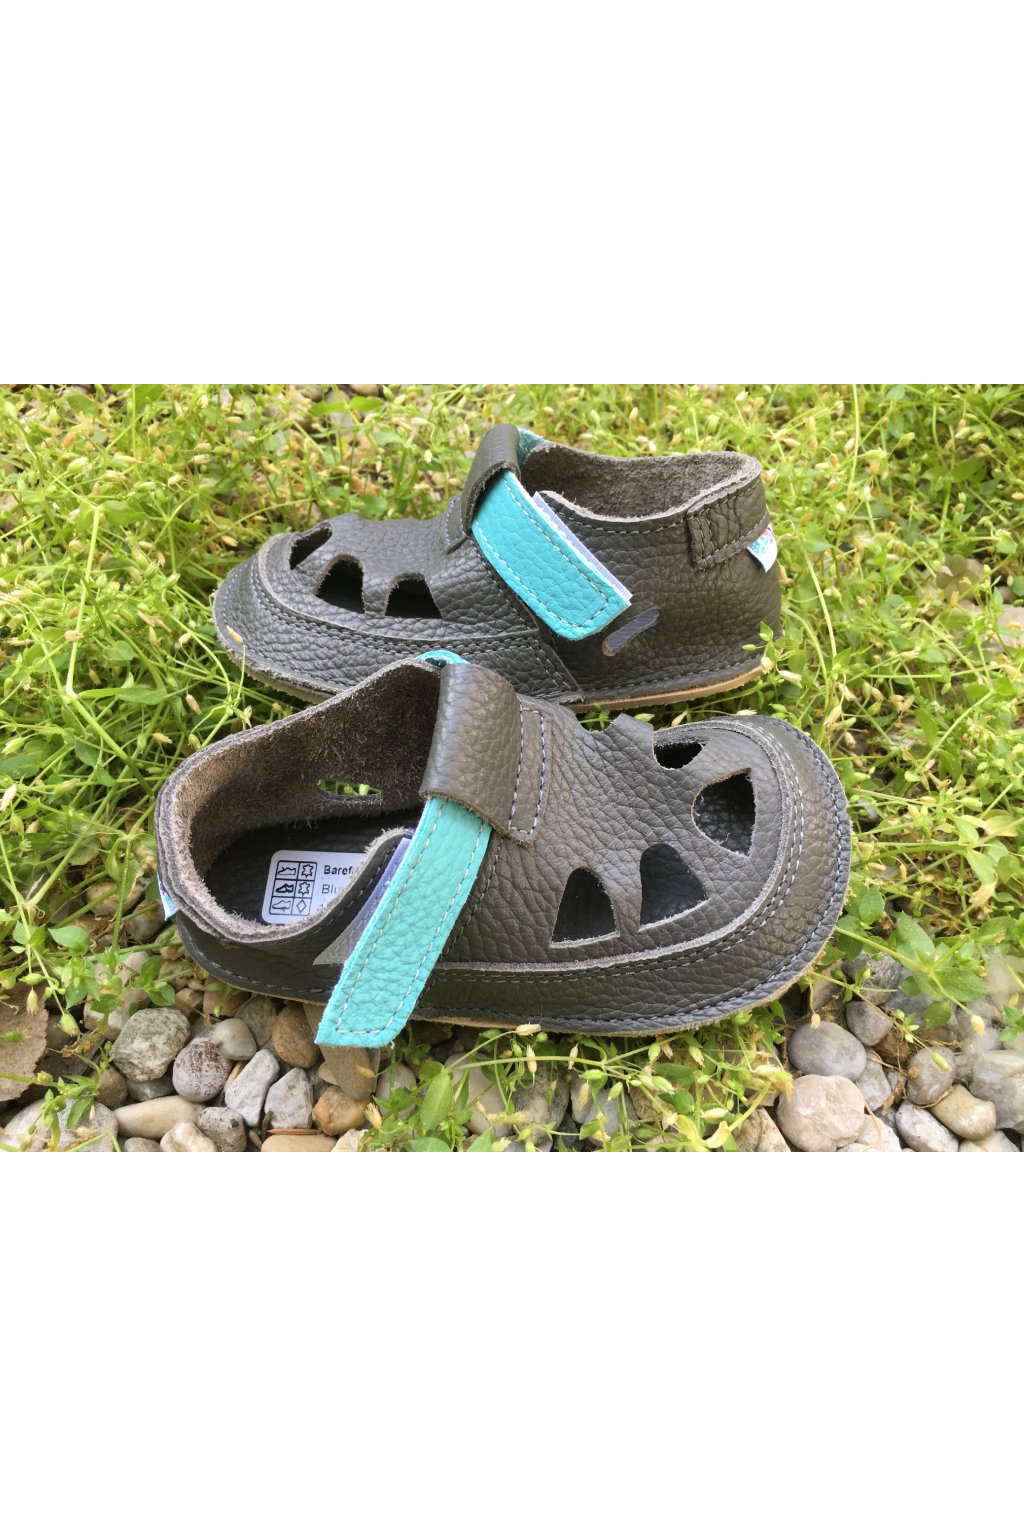 Baby Bare Shoes IO Blue Beetle - Summer Perforation